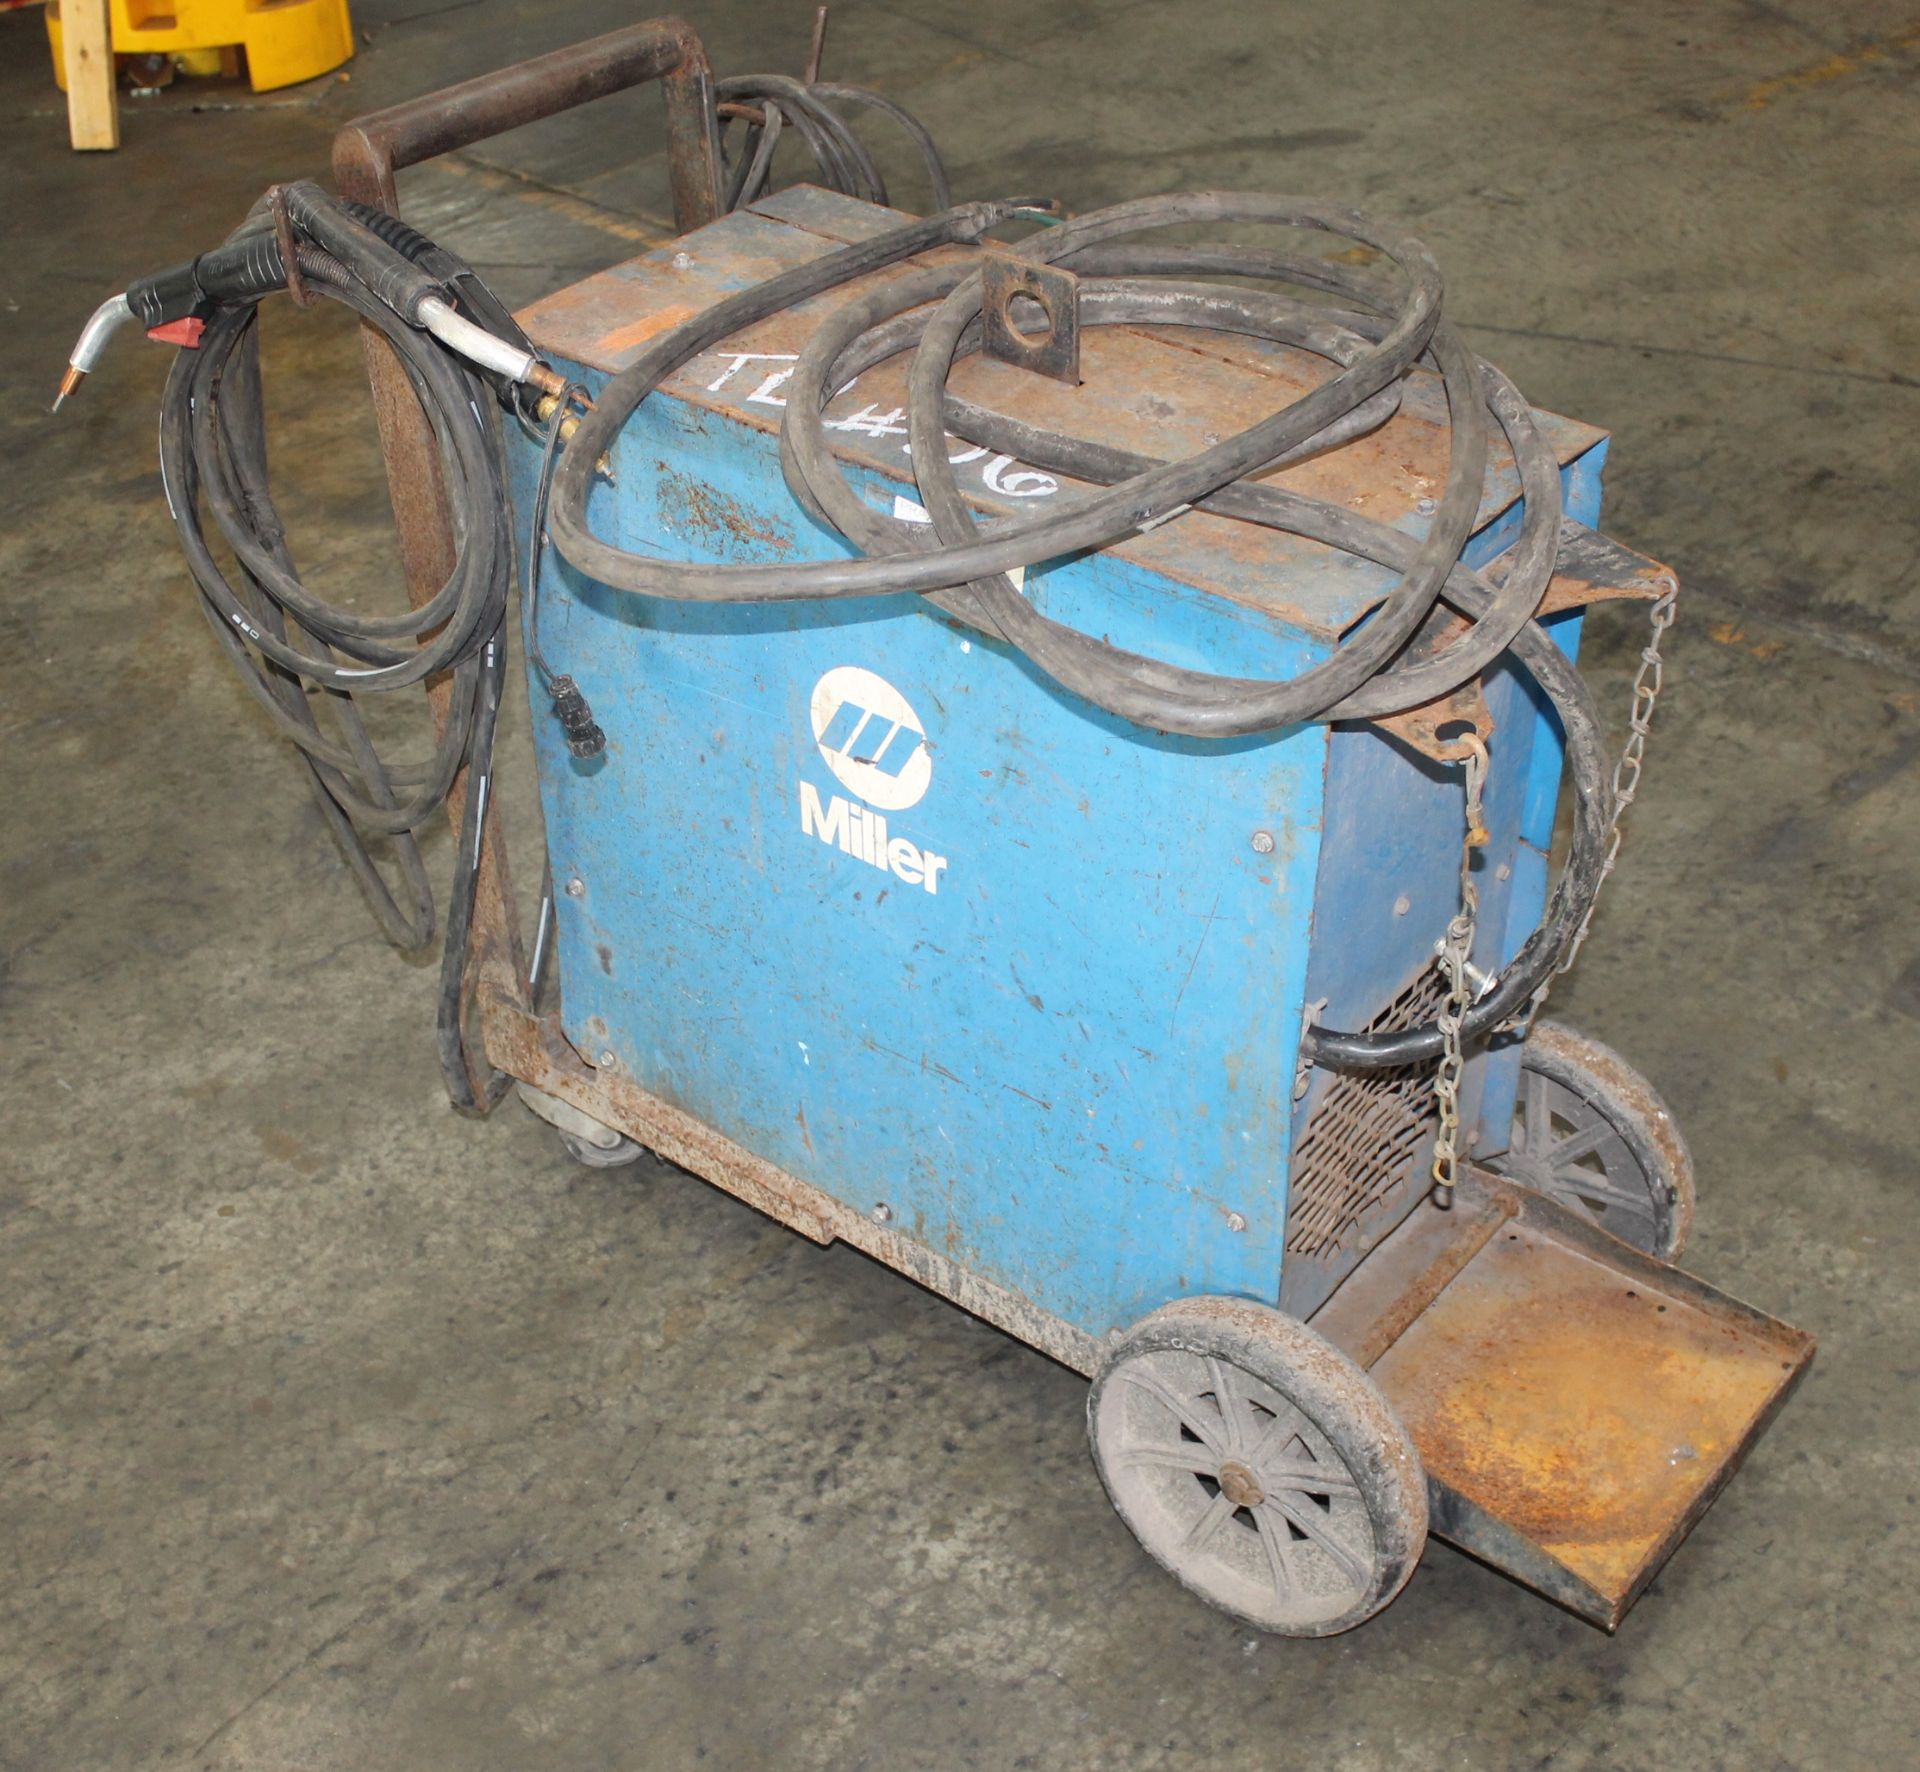 MILLER MILLERMATIC 200 CONSTANT POTENTIAL DC ARC WELDER, VOLTS: 200/230, AMPS: 46/40, KW: 8.3, 1 PH, - Image 2 of 7